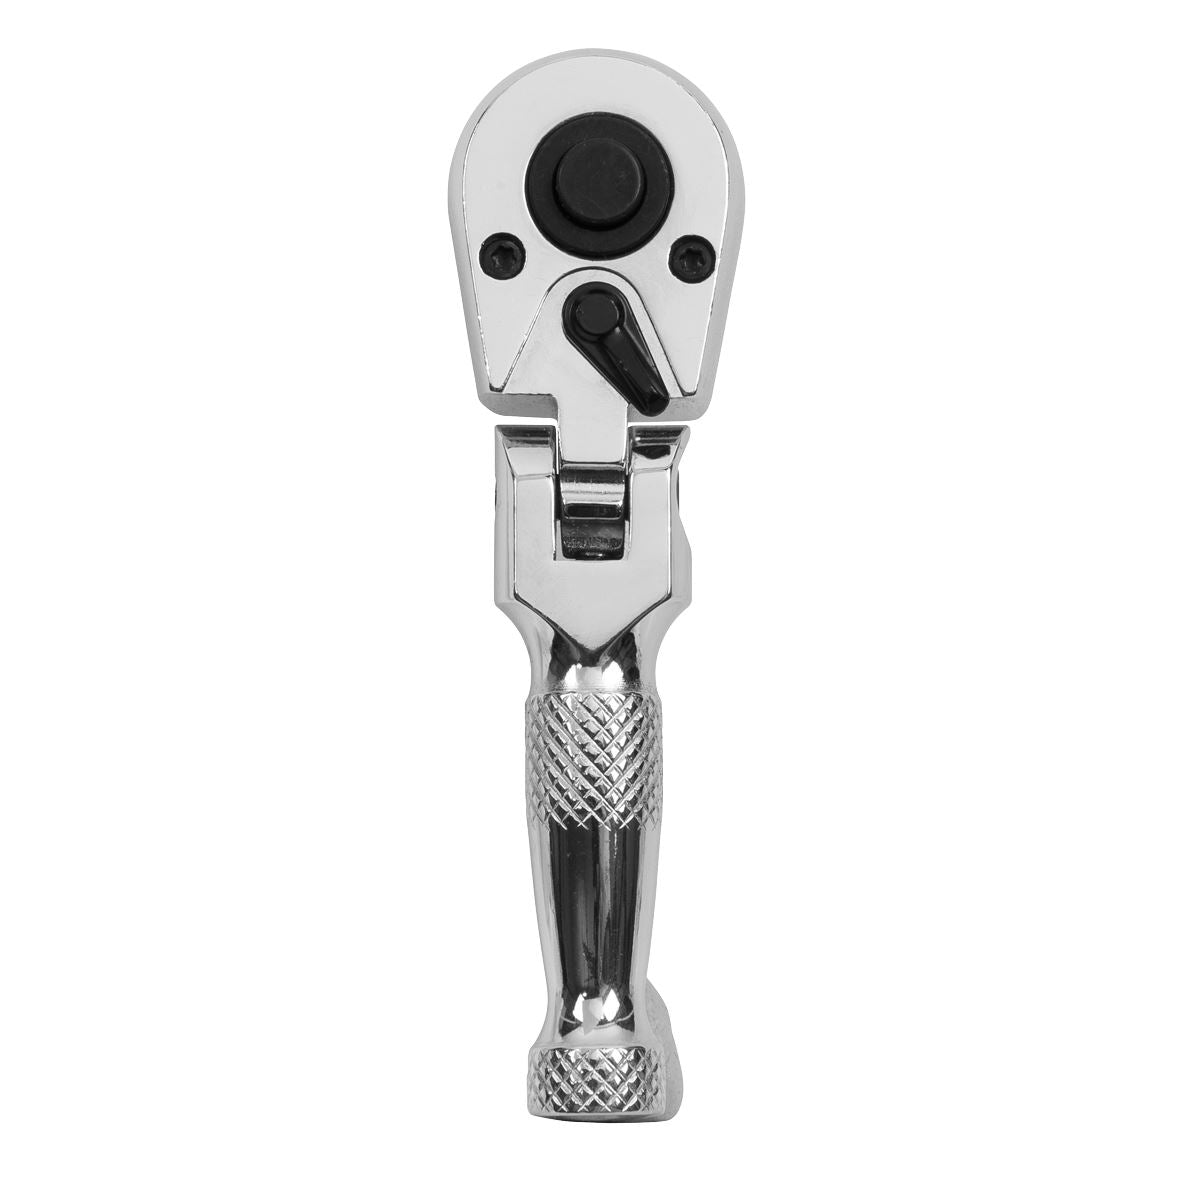 Sealey Ratchet Handle Socket Wrench Flexi Head Stubby 1/4" Drive 72 Tooth